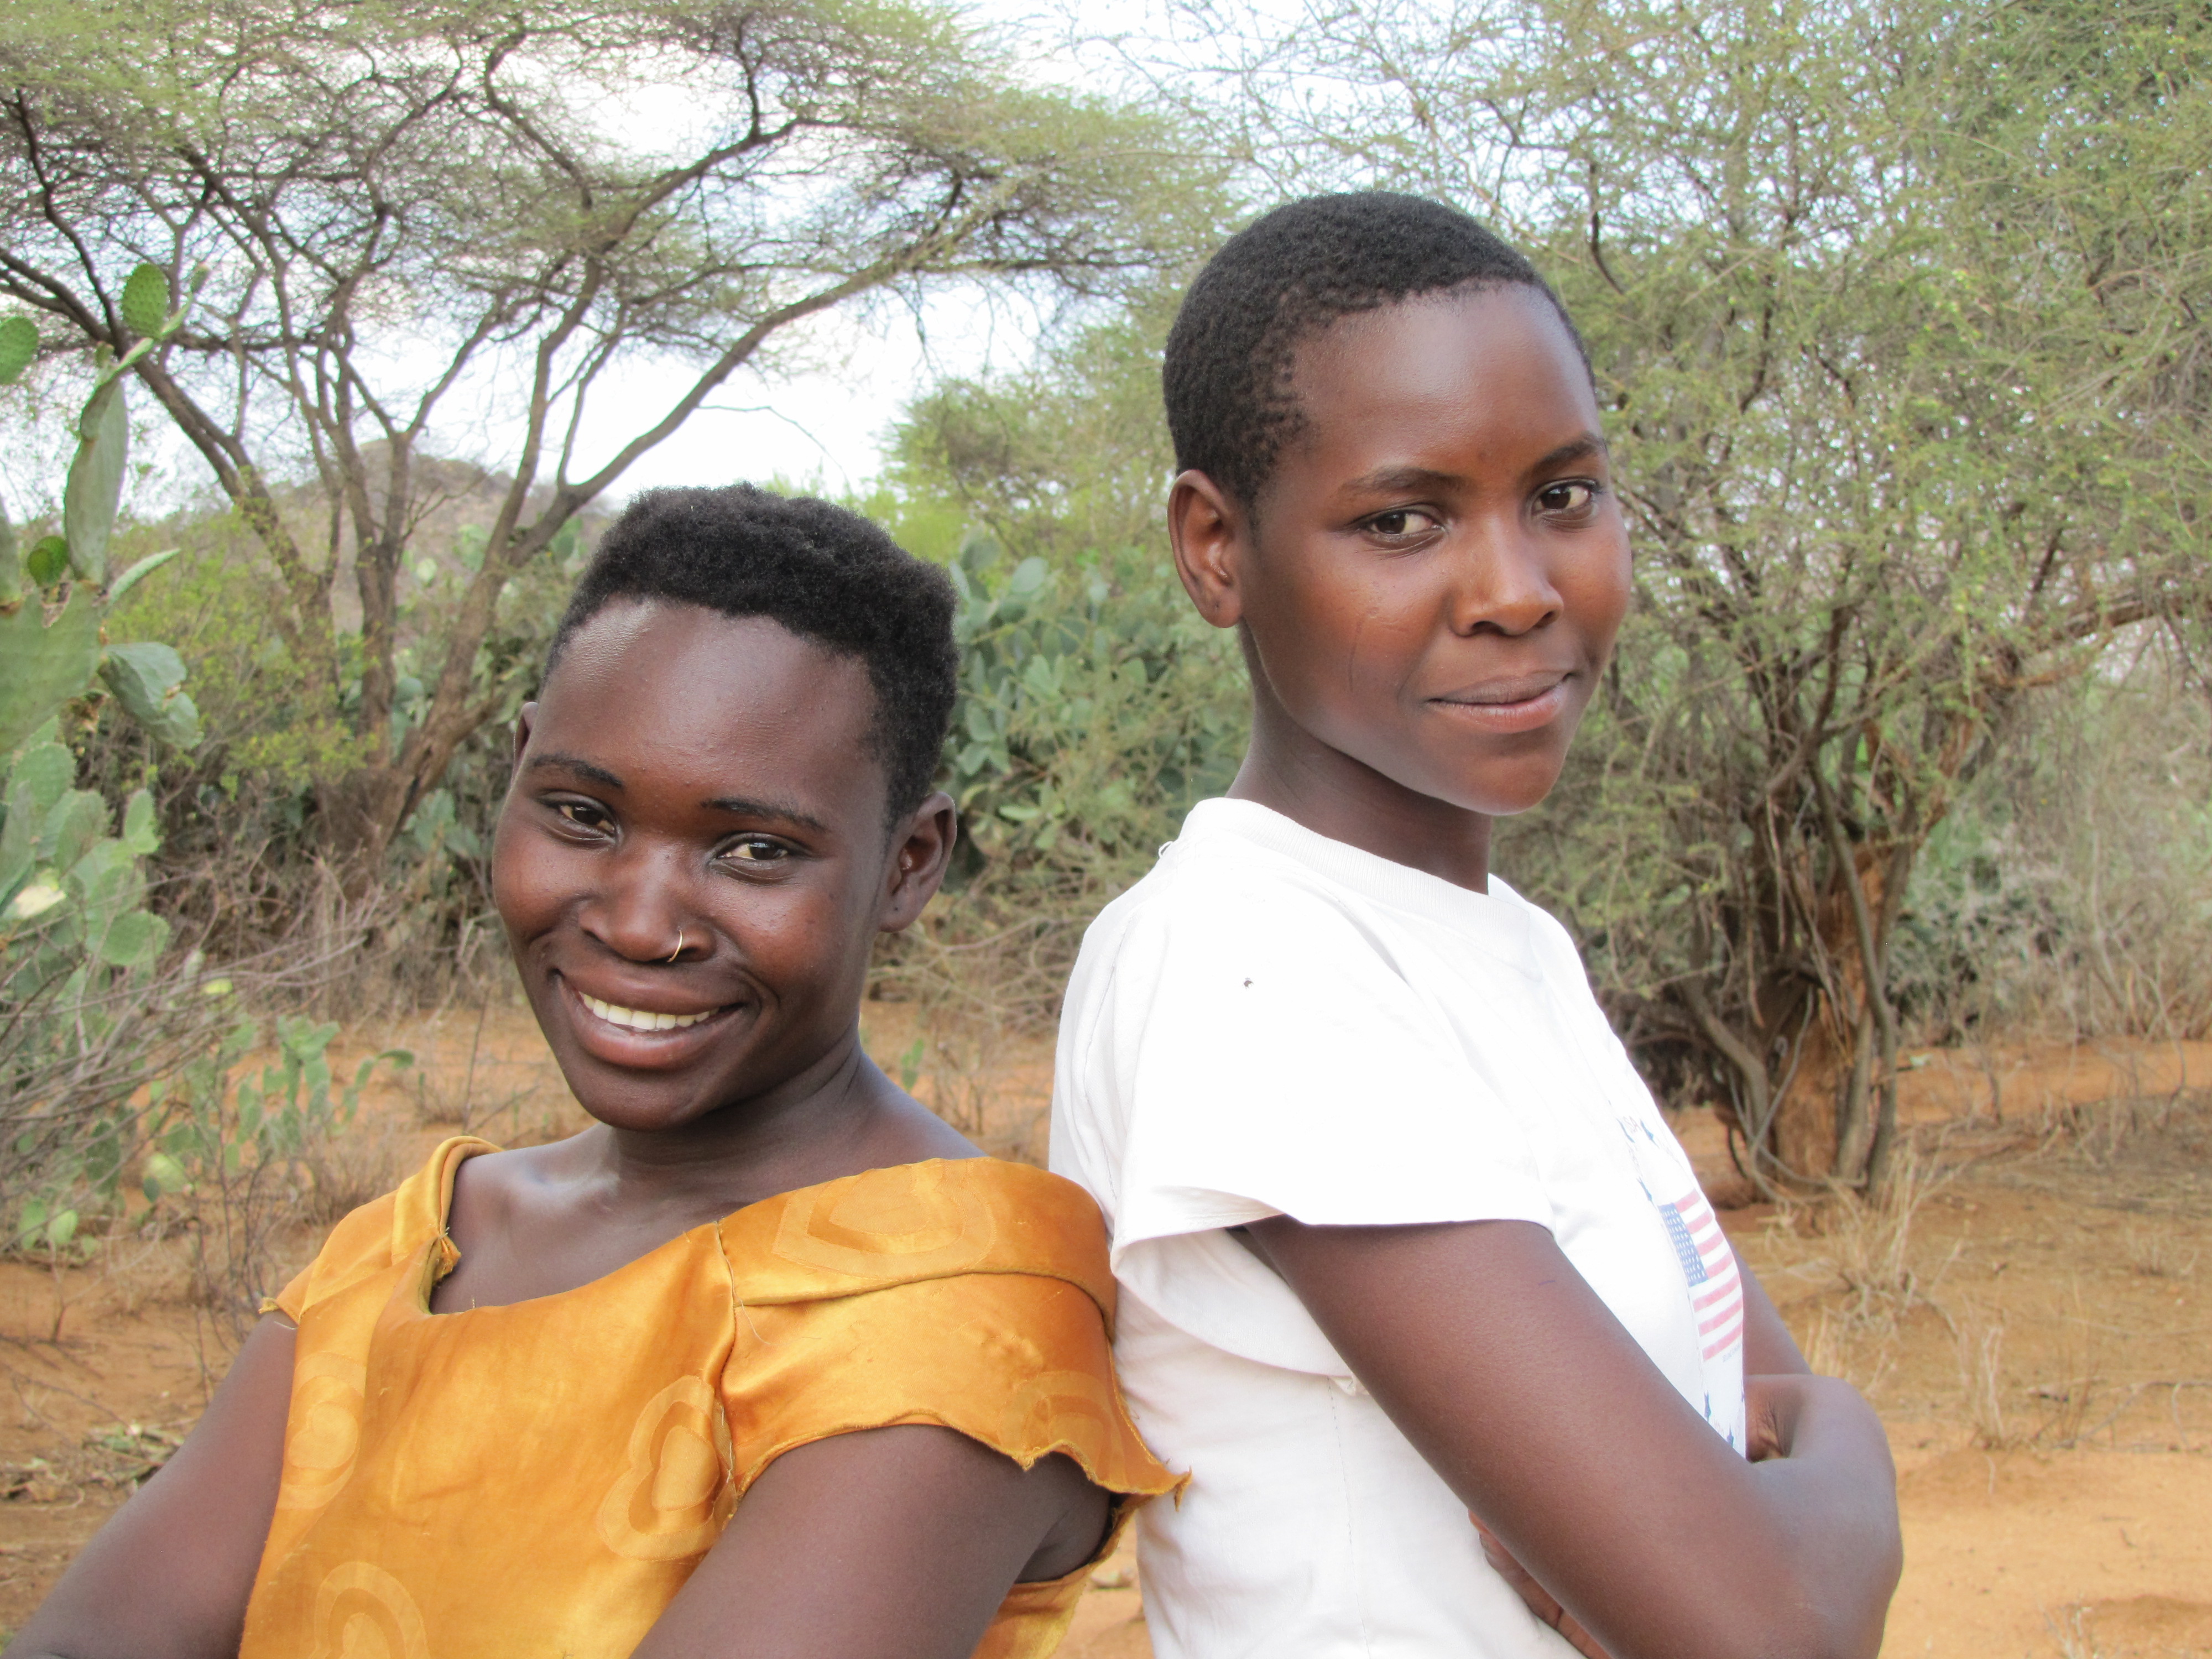 Two people from the Hadza group pose and smile outdoors